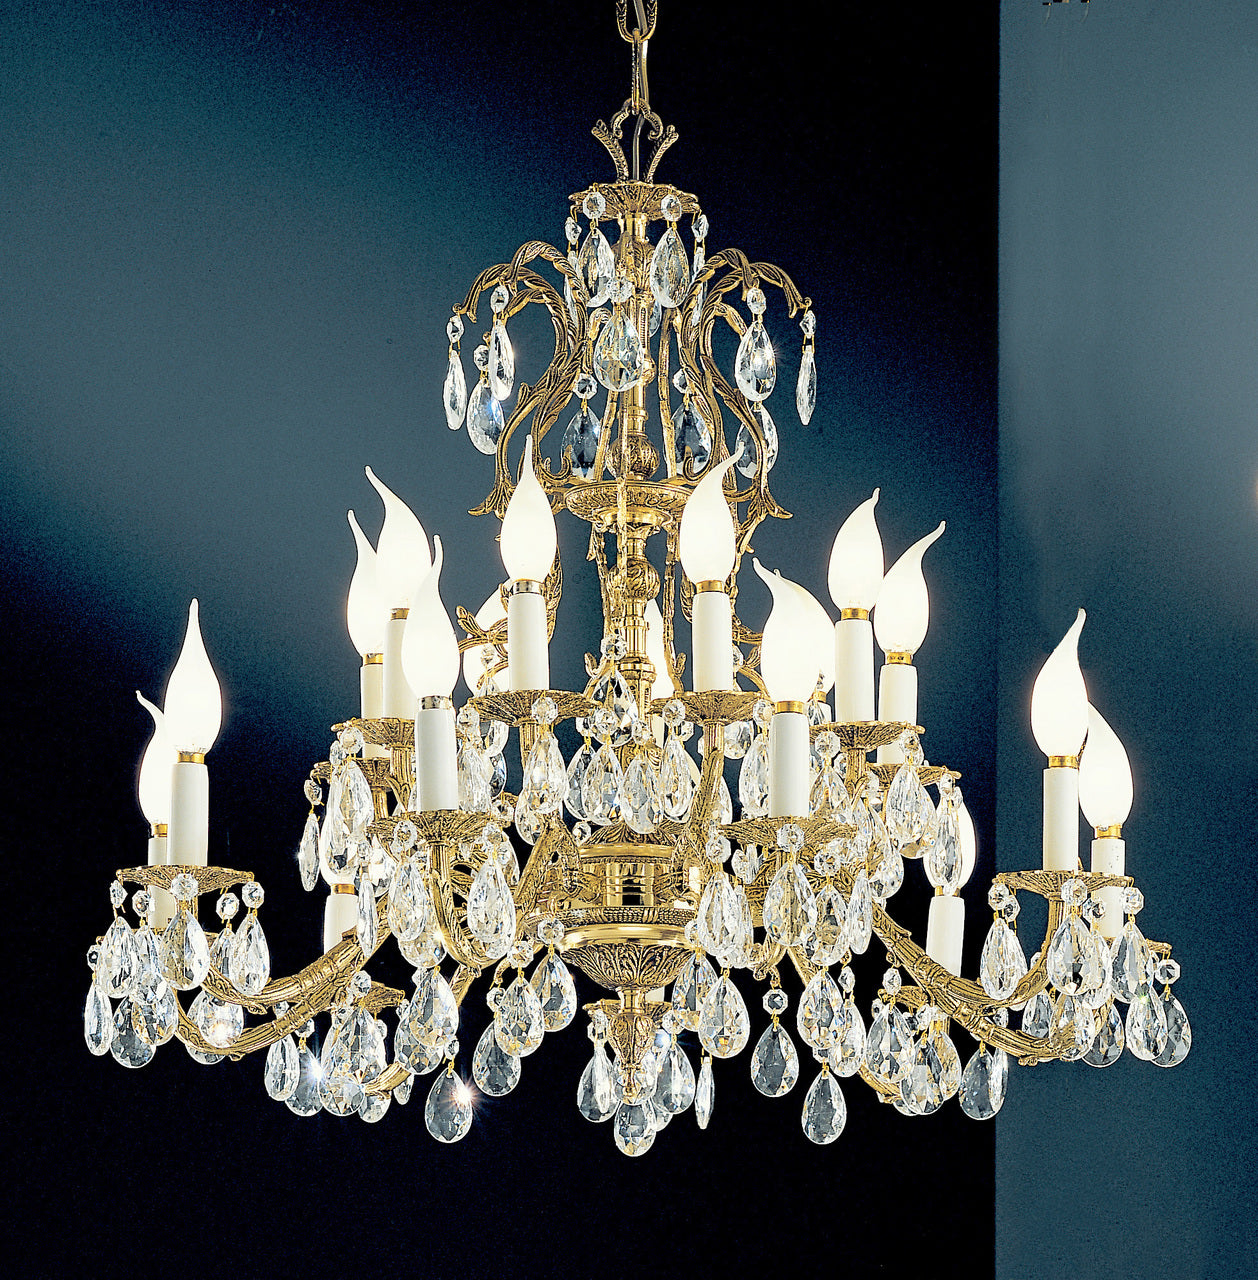 Classic Lighting 5518 OWB I Barcelona Crystal/Cast Brass Chandelier in Olde World Bronze (Imported from Spain)